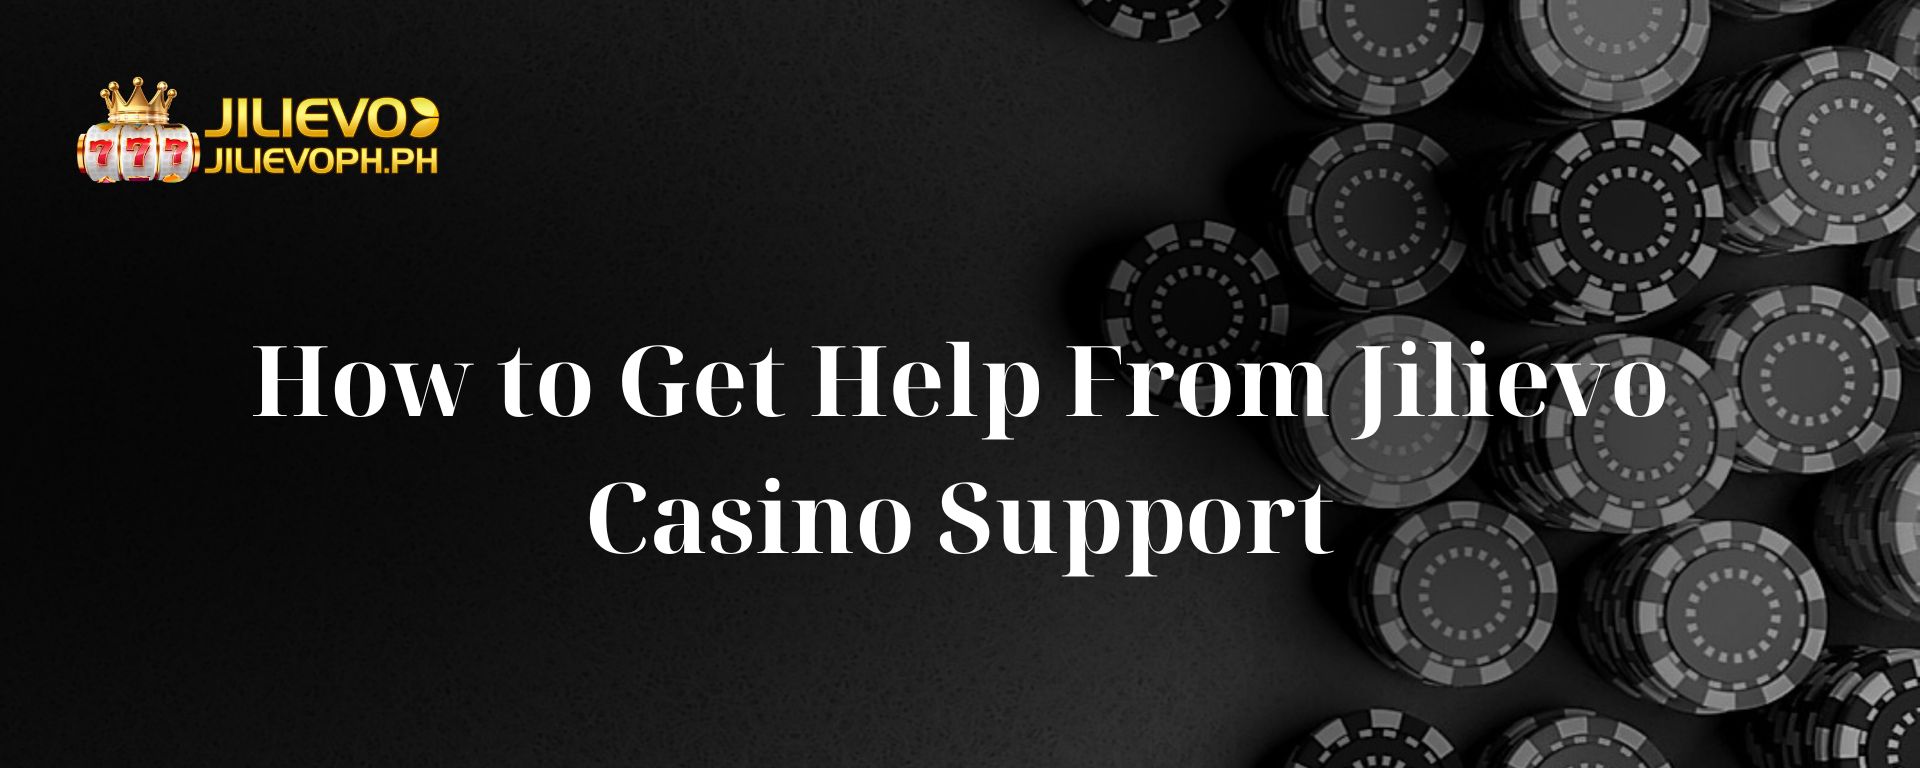 How to Get Help From Jilievo Casino Support